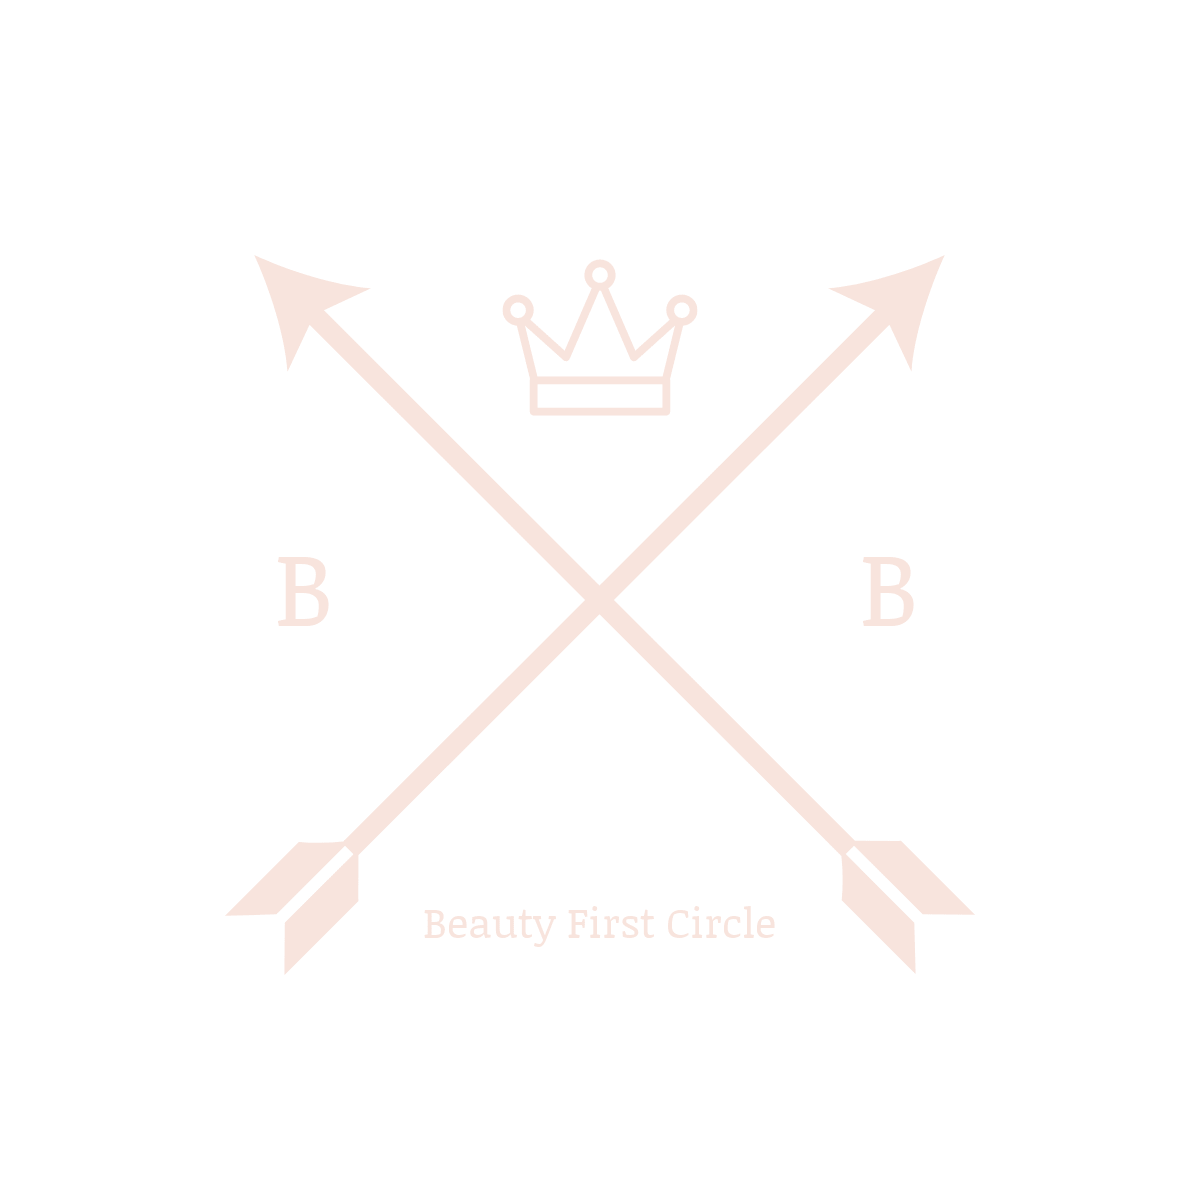 Beauty First Circle